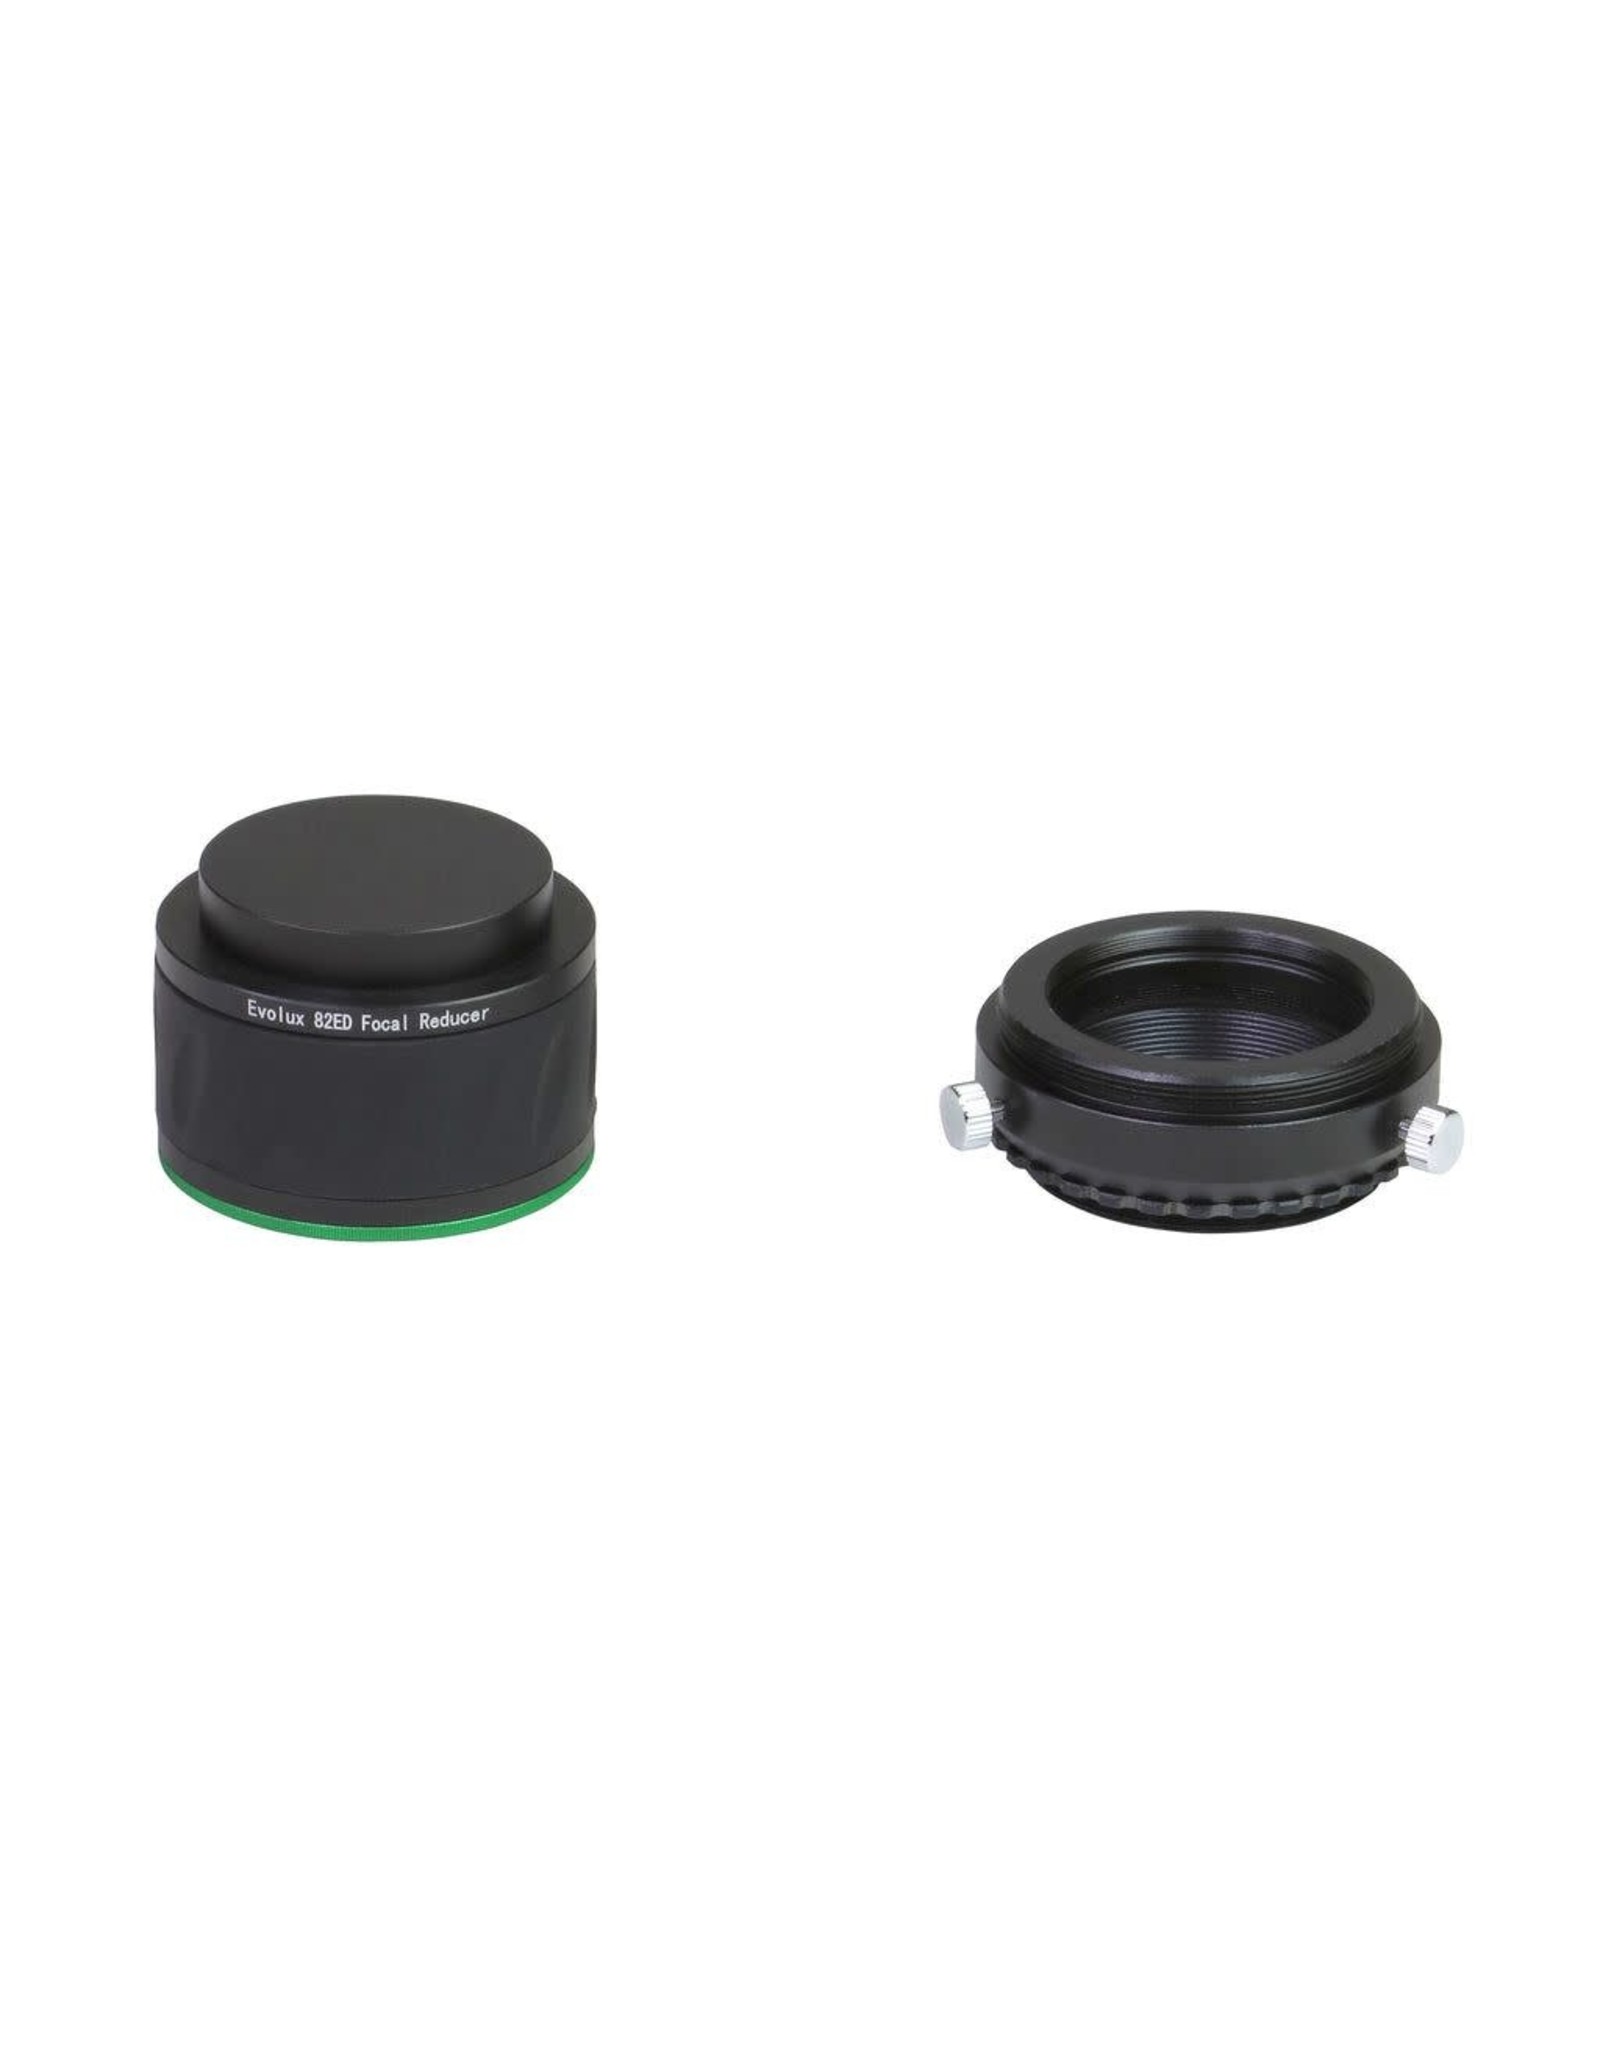 Sky-Watcher Sky-Watcher Evolux 82ED 0.9X Reducer and Corrector - S20207 (LIMITED QUANTITIES)